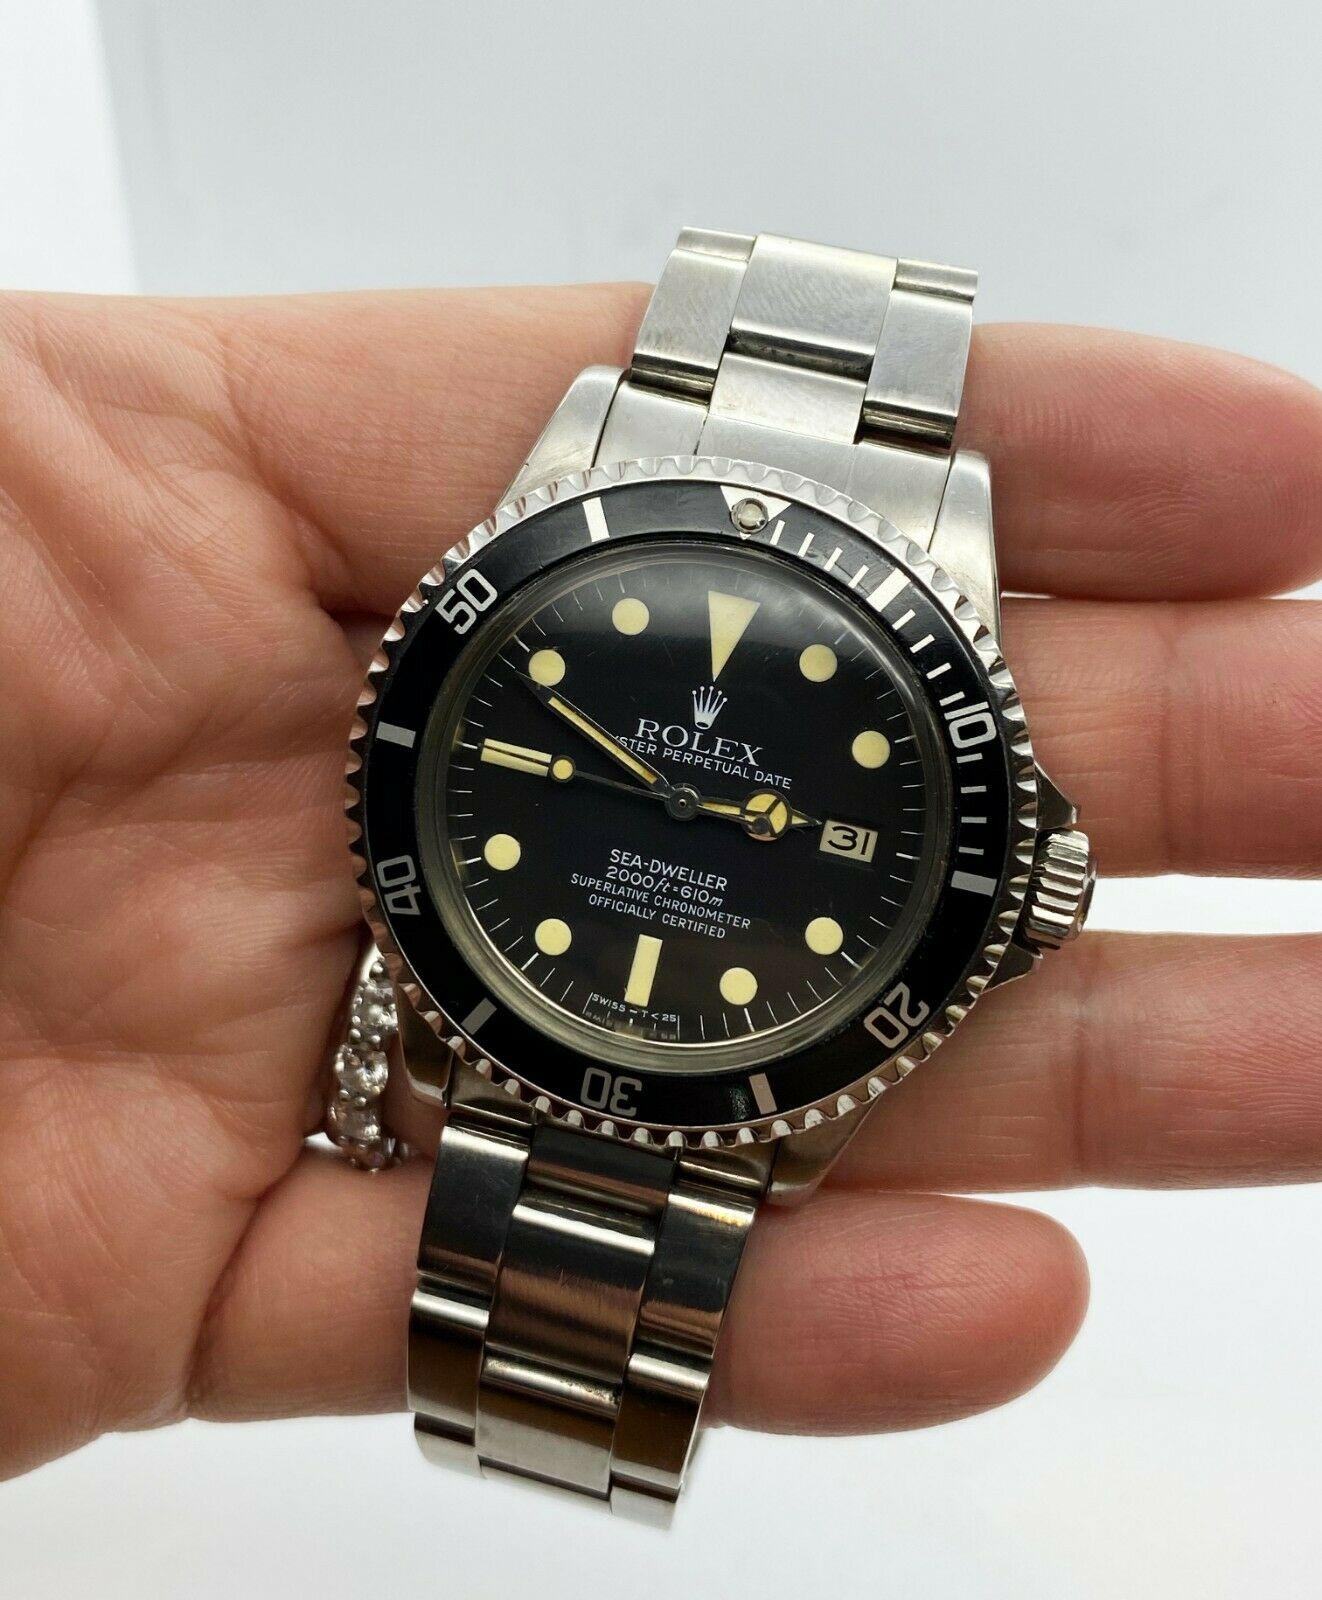 Style Number: 1665

 

Serial: 6752***


Year: 1981

 

Model: Sea Dweller

 

Case Material: Stainless Steel

 

Band: Stainless Steel

 

Bezel:  Stainless Steel

 

Dial: Black

 

Face: Acrylic

 

Case Size: 40mm

 

Includes: 

-Elegant Watch